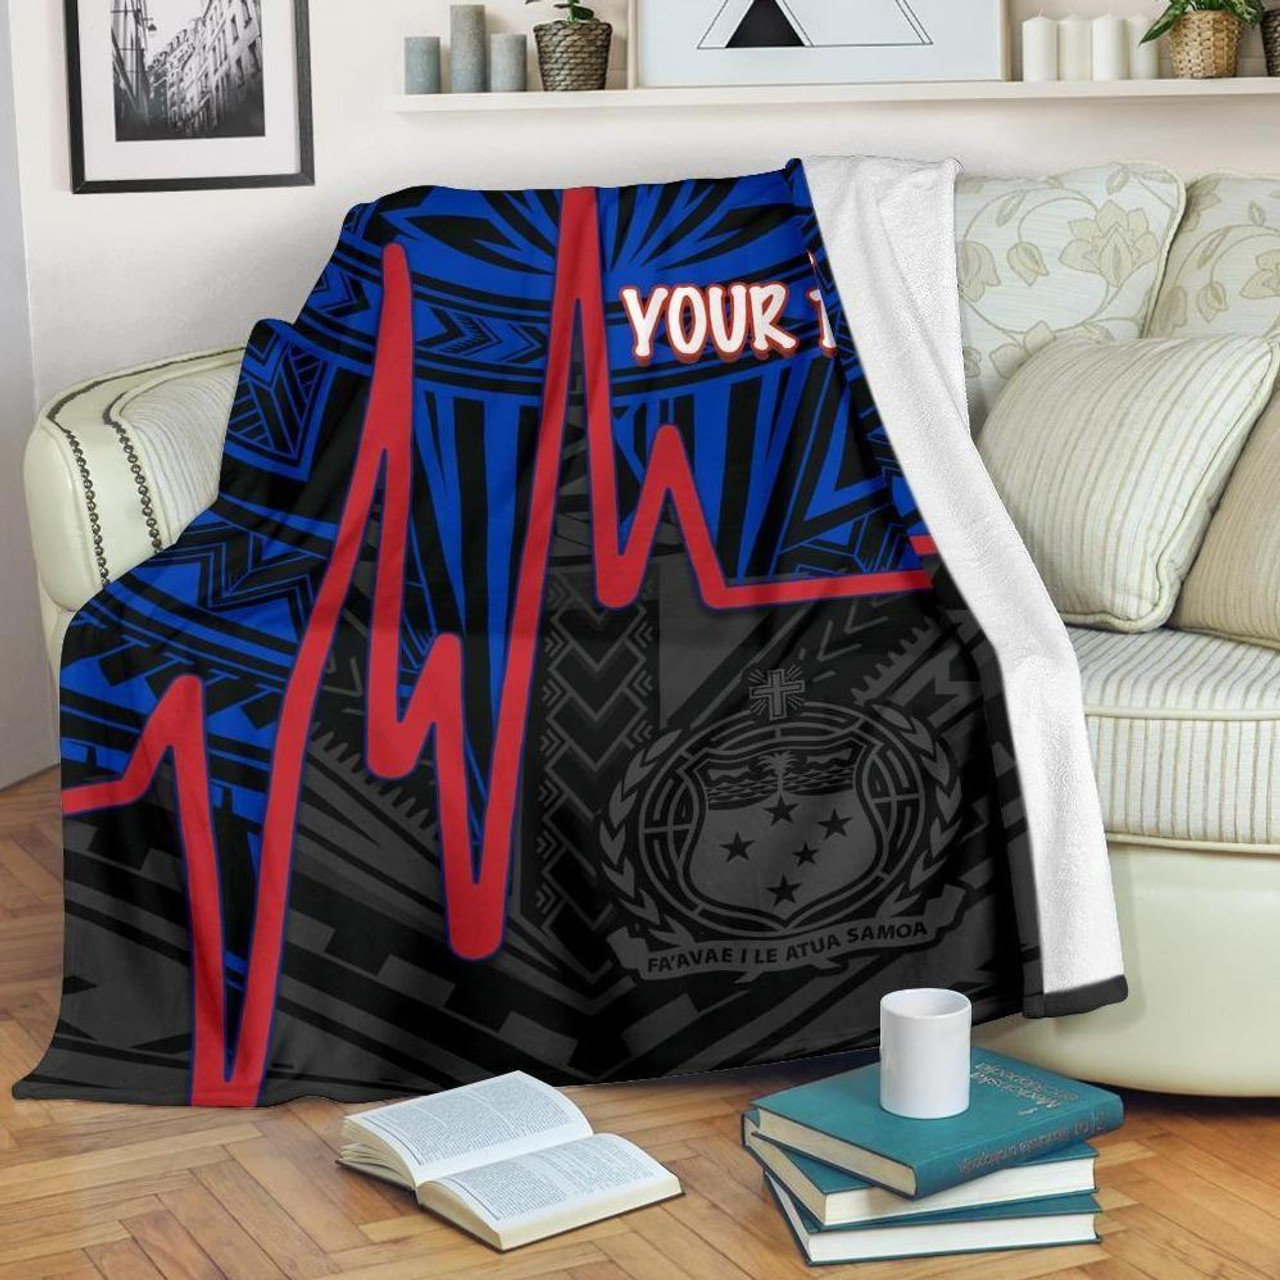 Samoa Personalised Premium Blanket - Samoa Seal With Polynesian Patterns In Heartbeat Style (Blue) 2